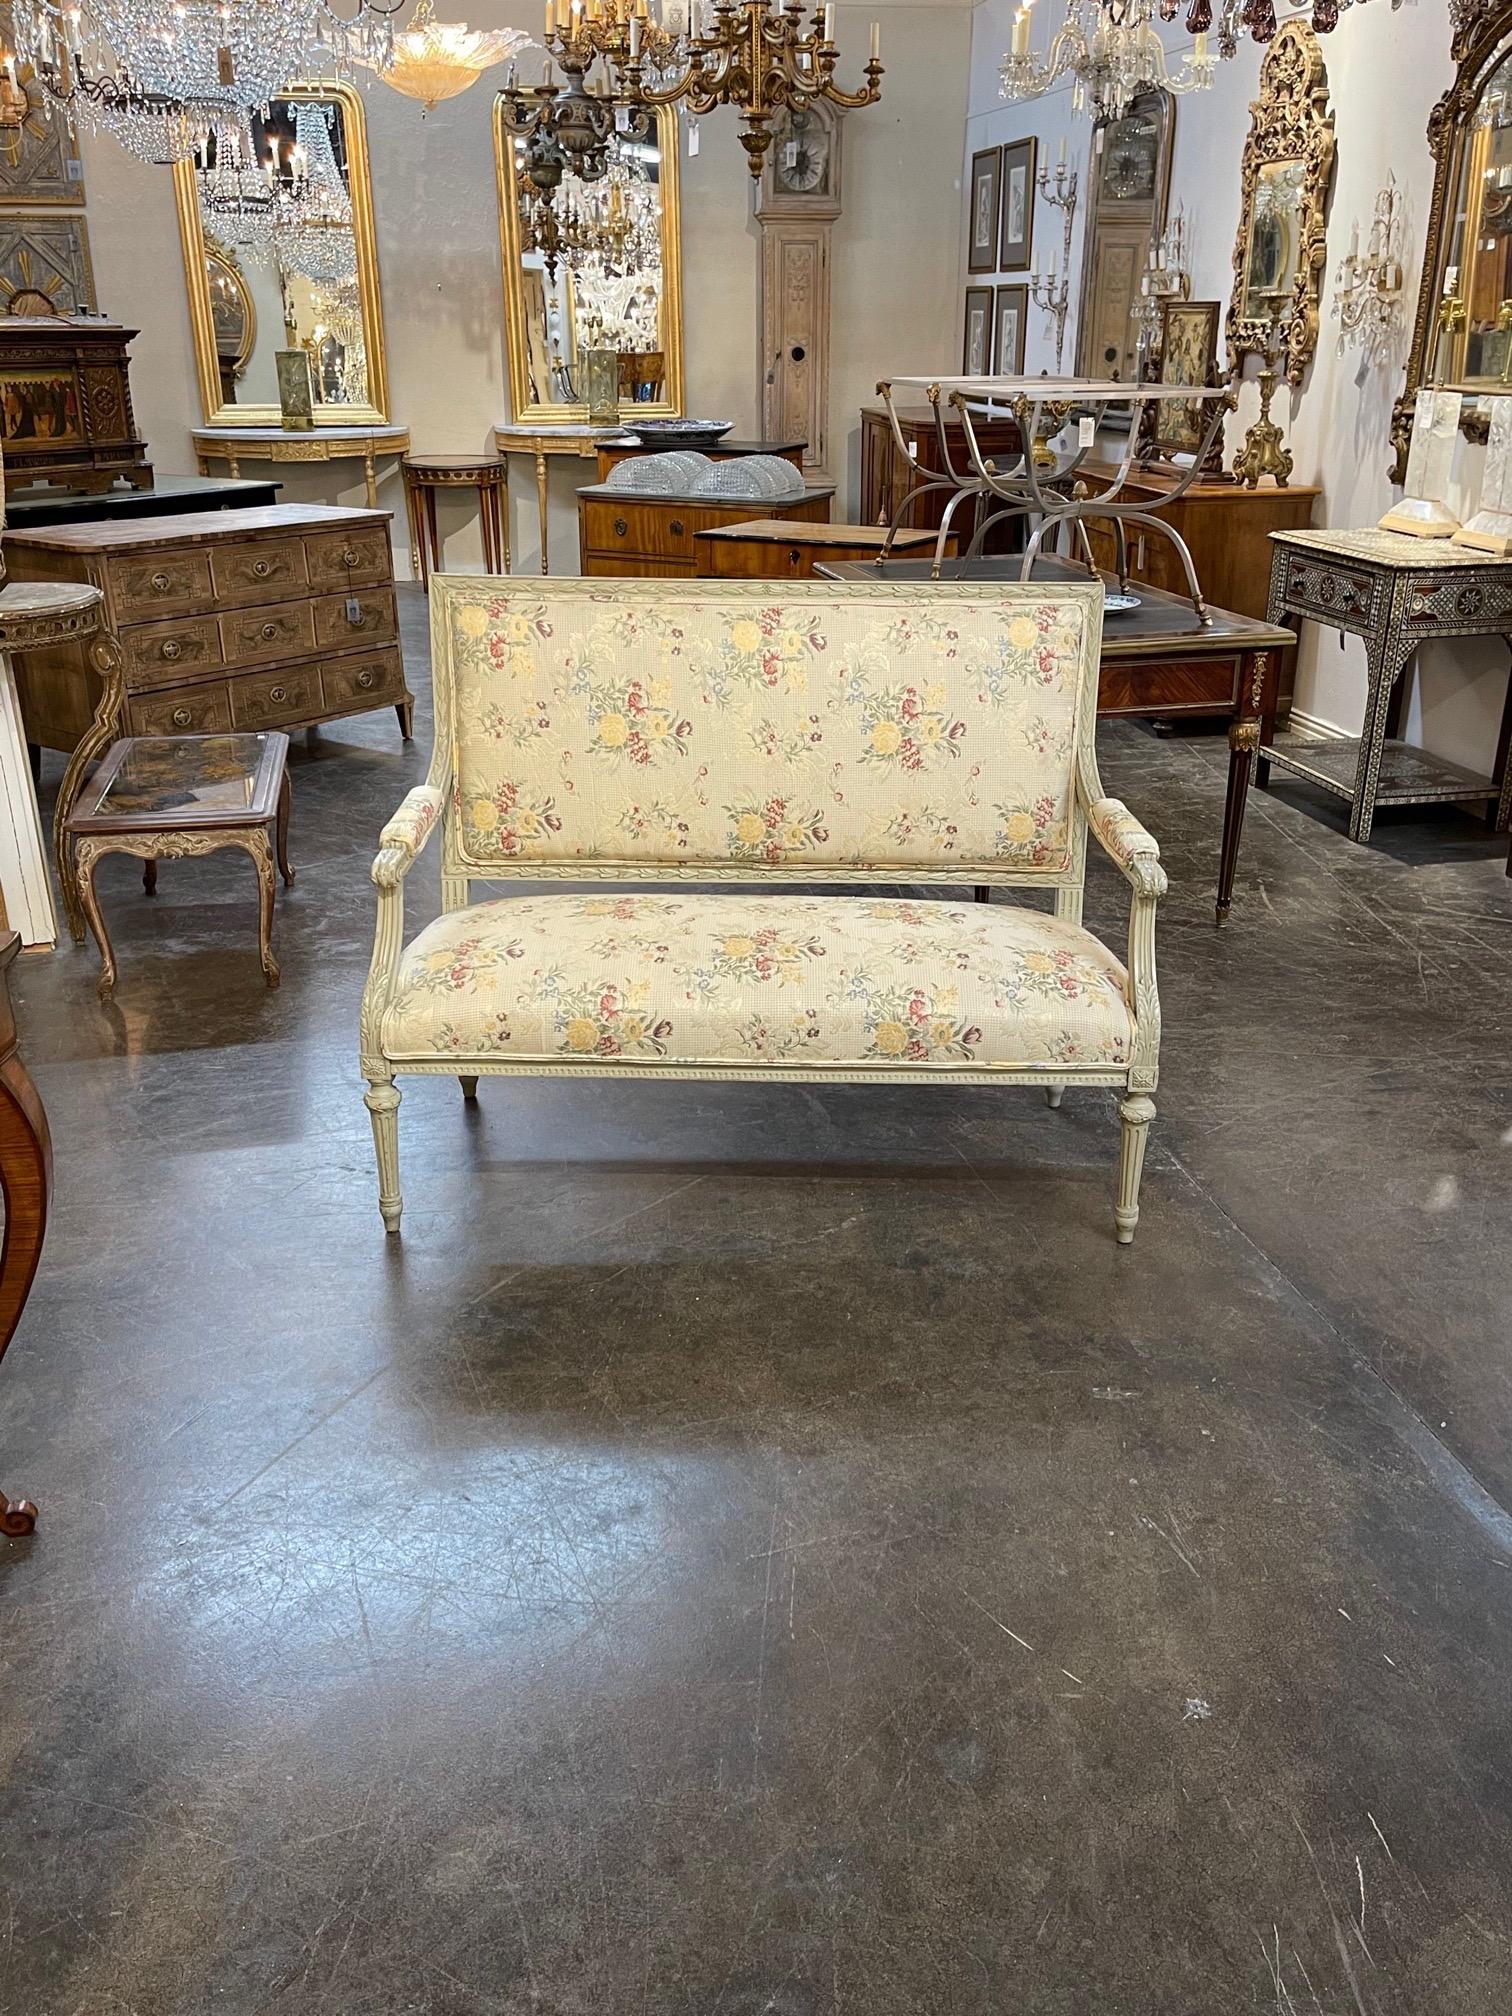 Splendid pair of the 19th century French Louis XVI style carved and painted settees. The pair is upholstered in a beautiful floral pattern. So pretty!! Note: Price listed is per item.